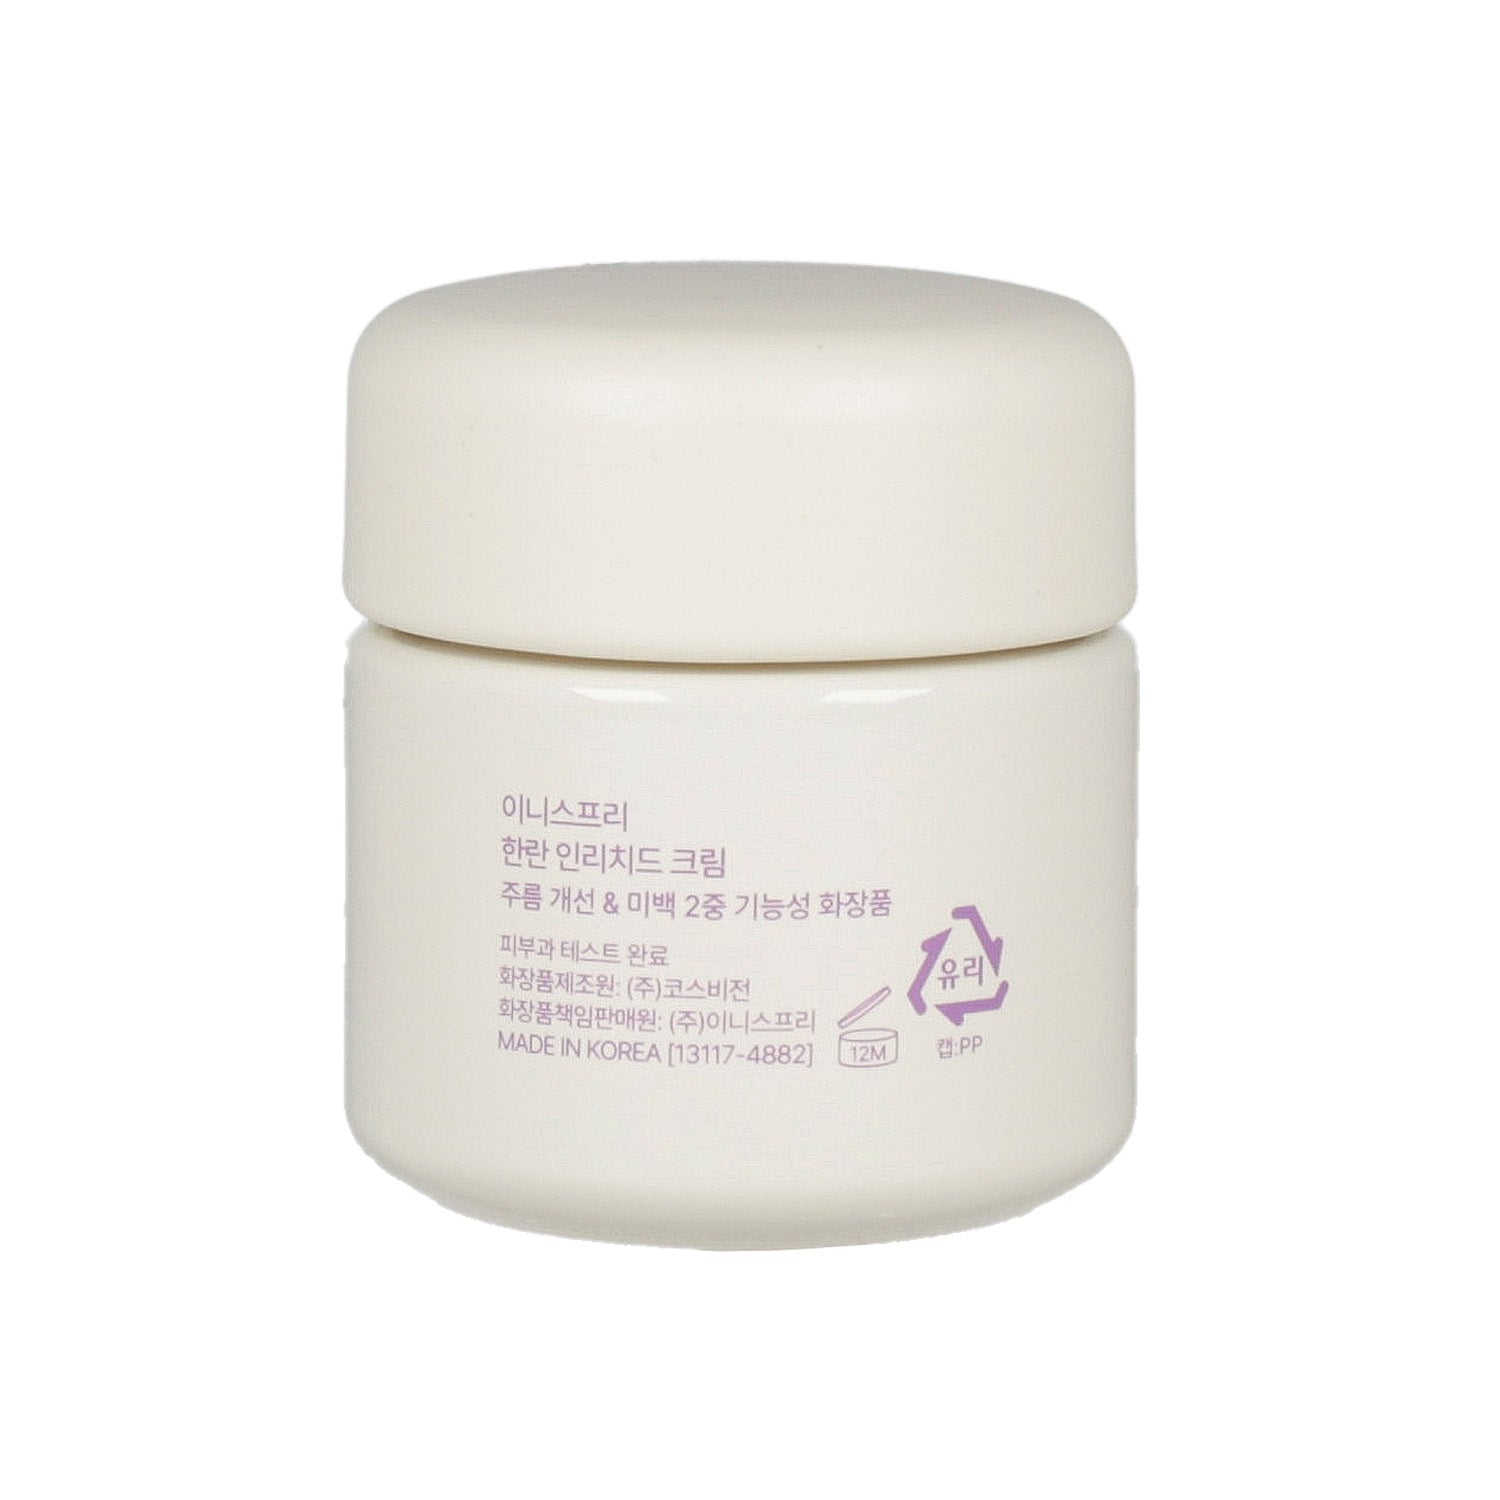 Helps to reduce the appearance of fine lines and wrinkles while improving skin elasticity.